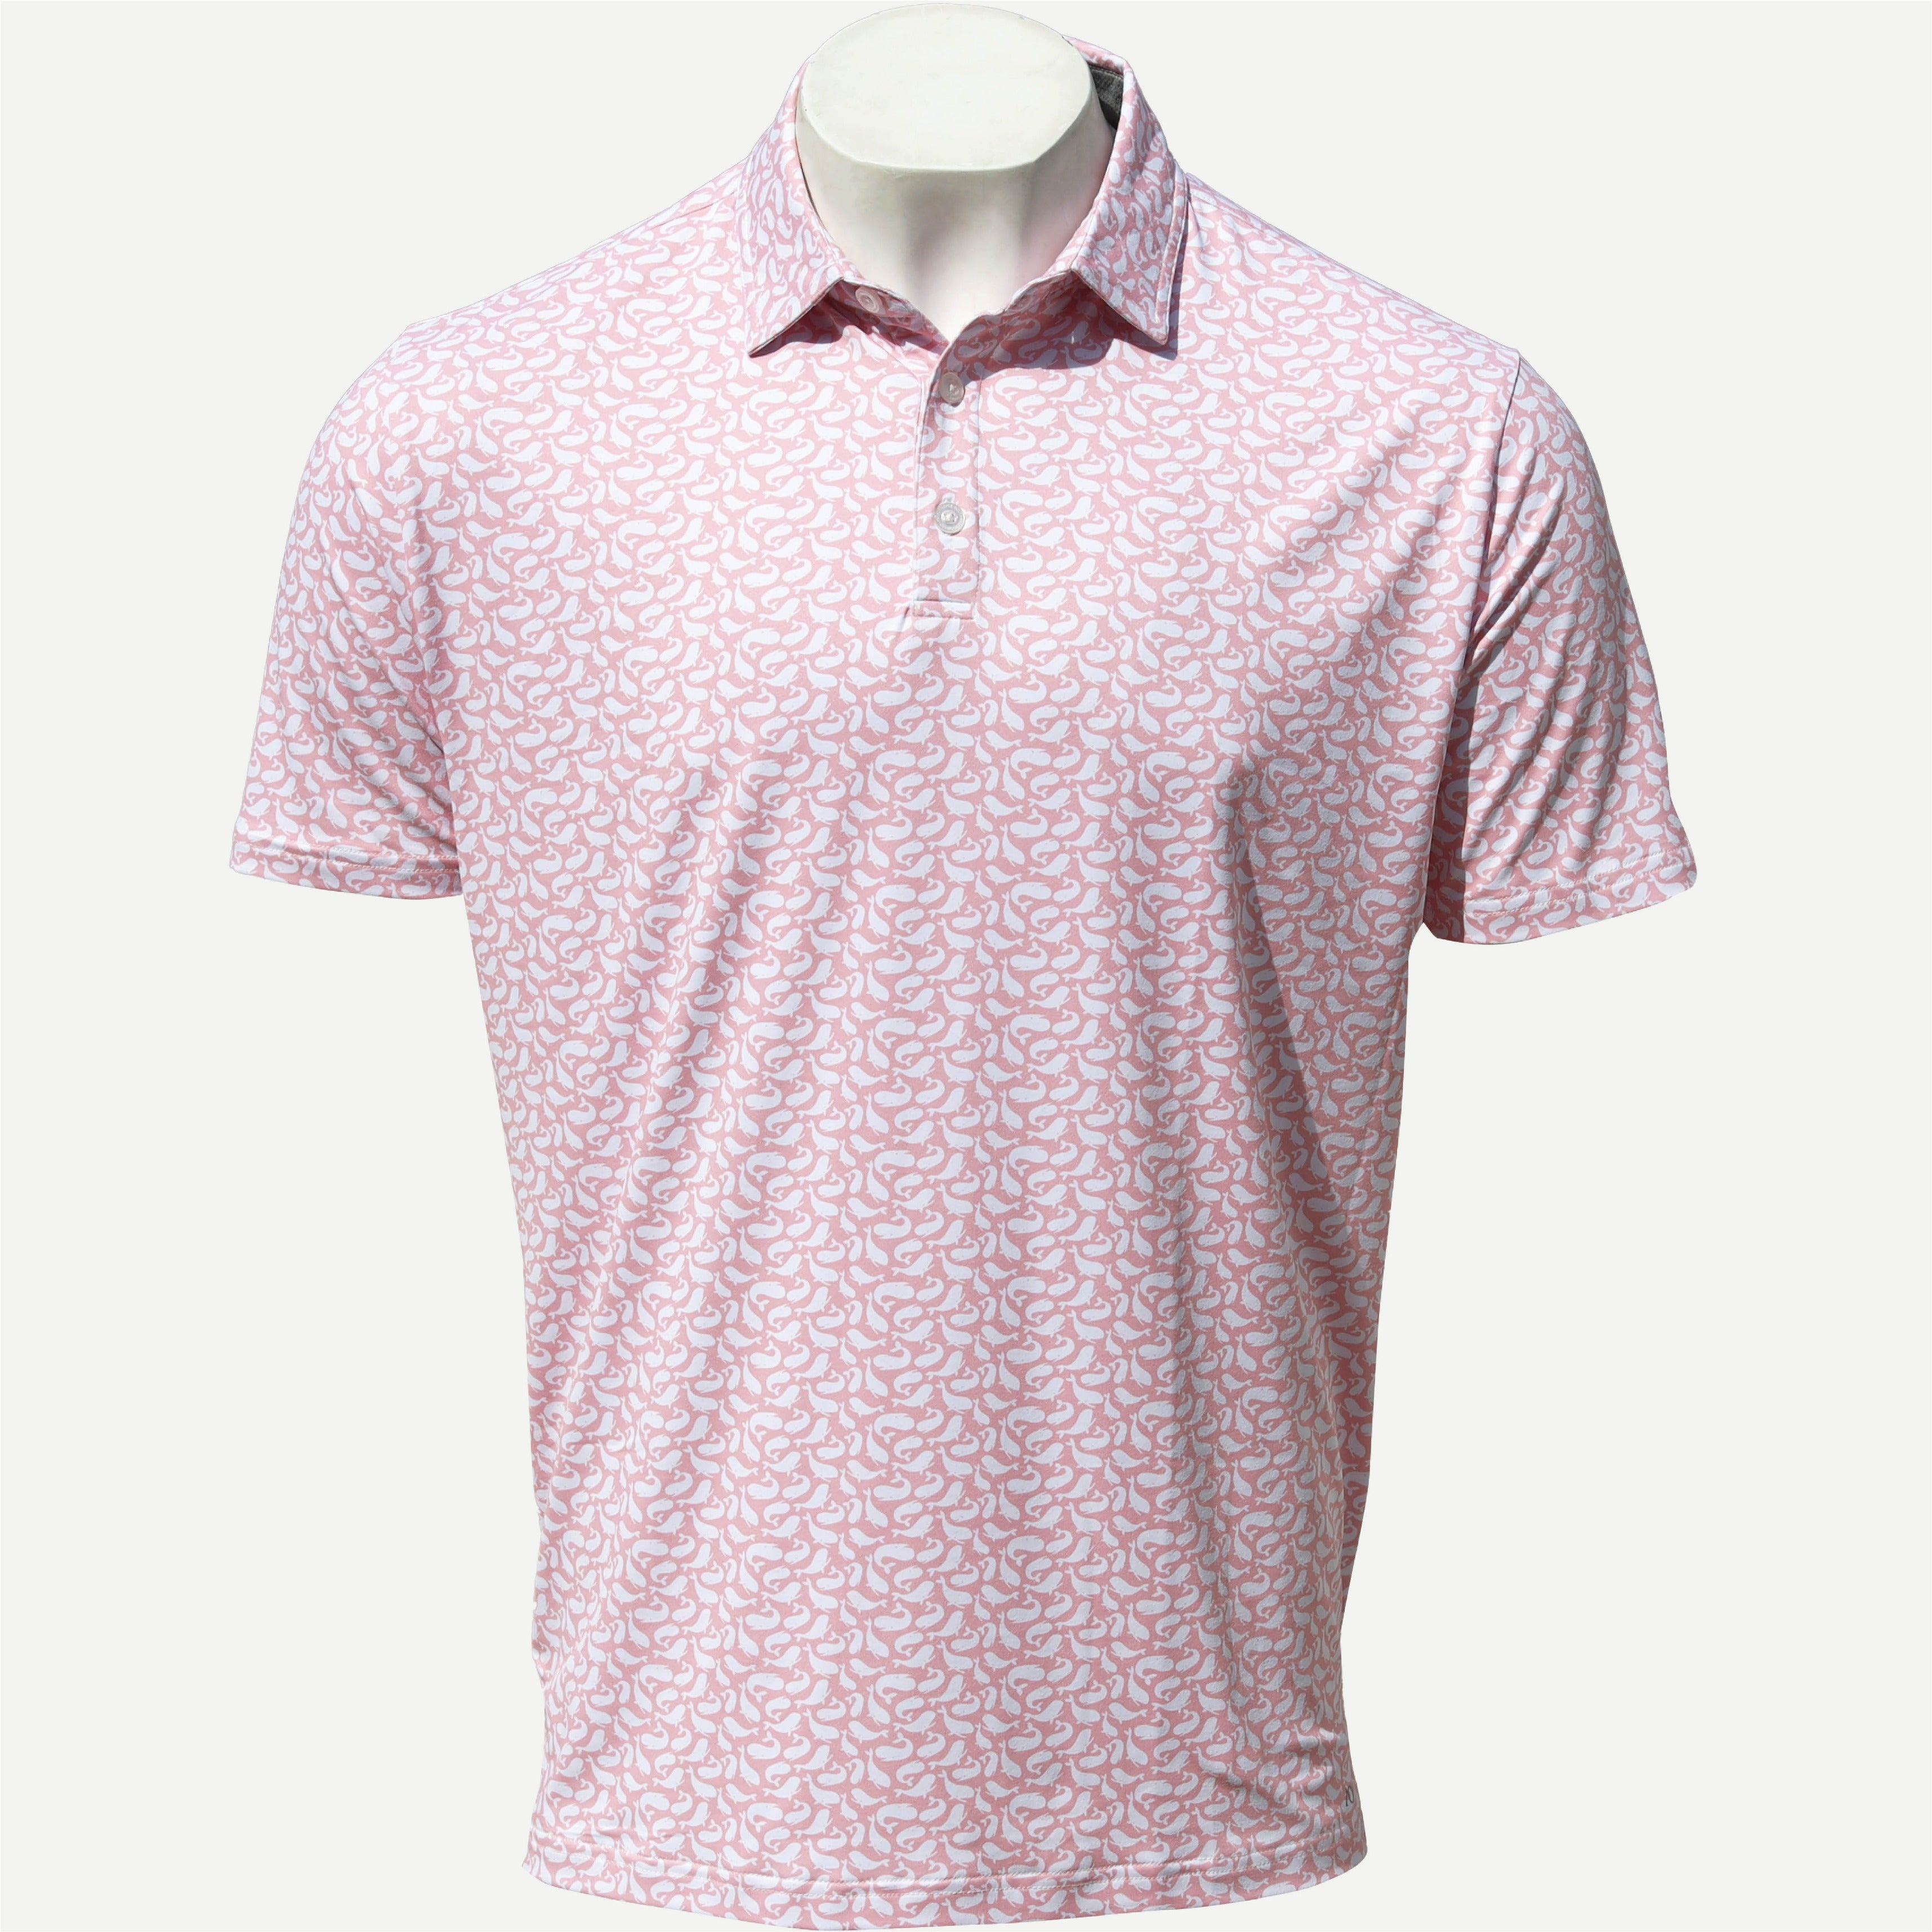 SPLASH POLO - ORCHID PINK